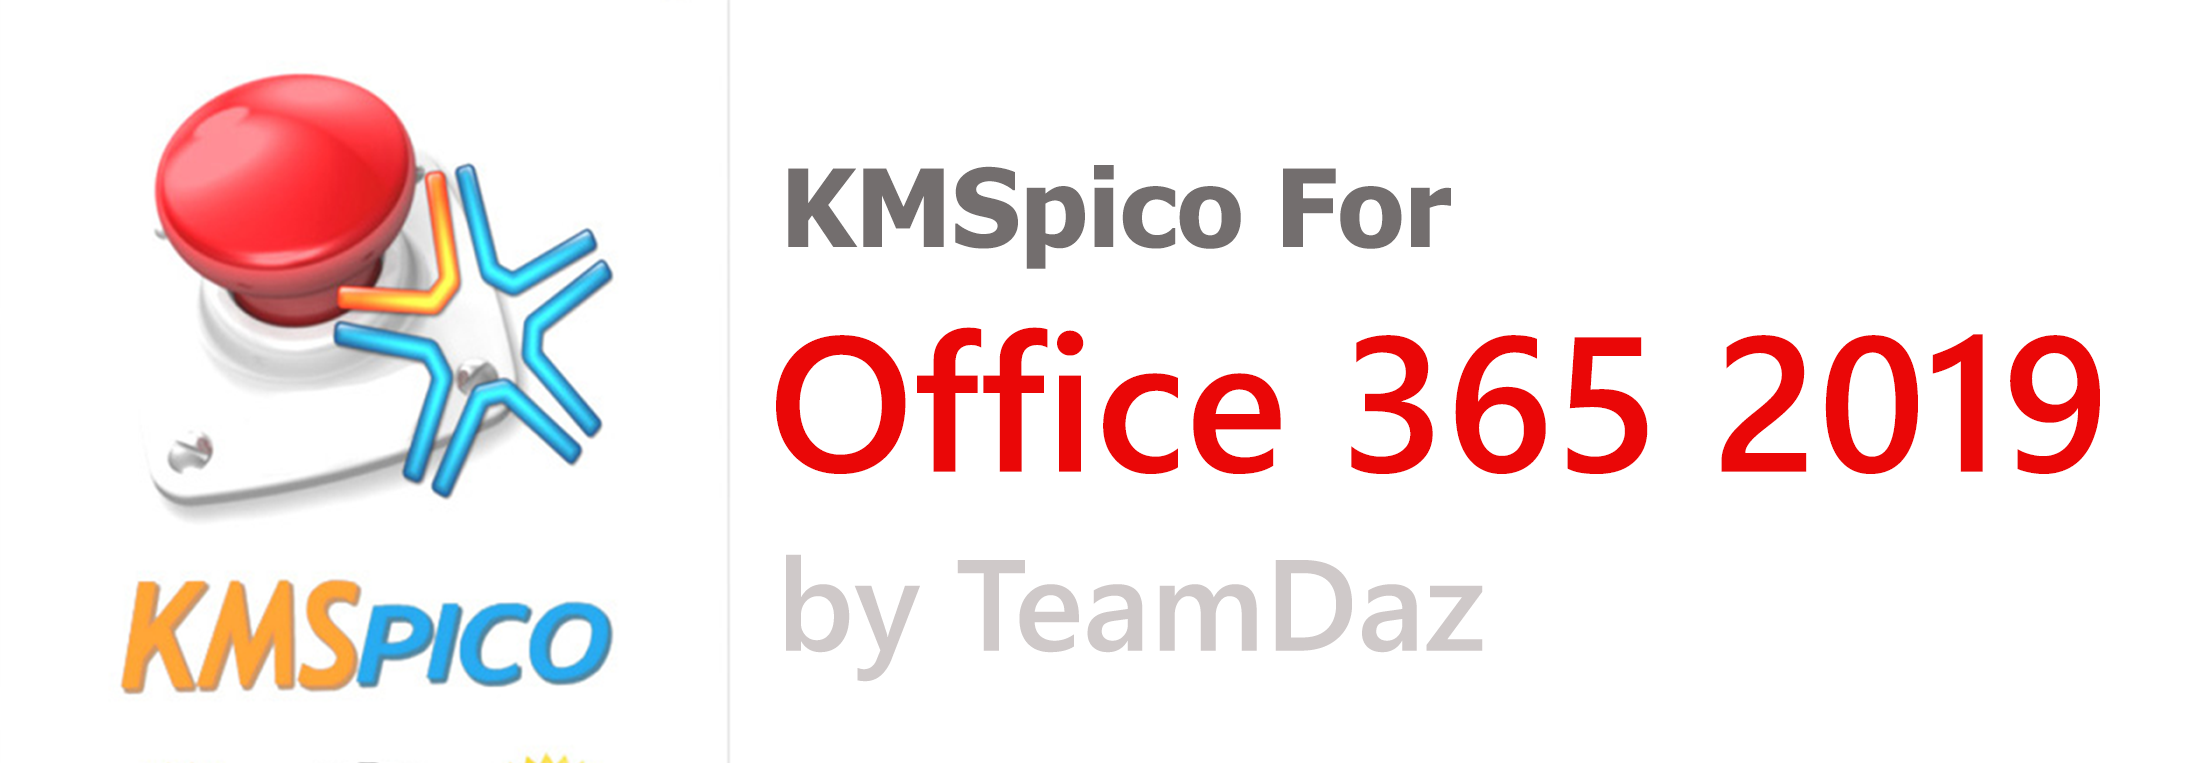 office 365 activator